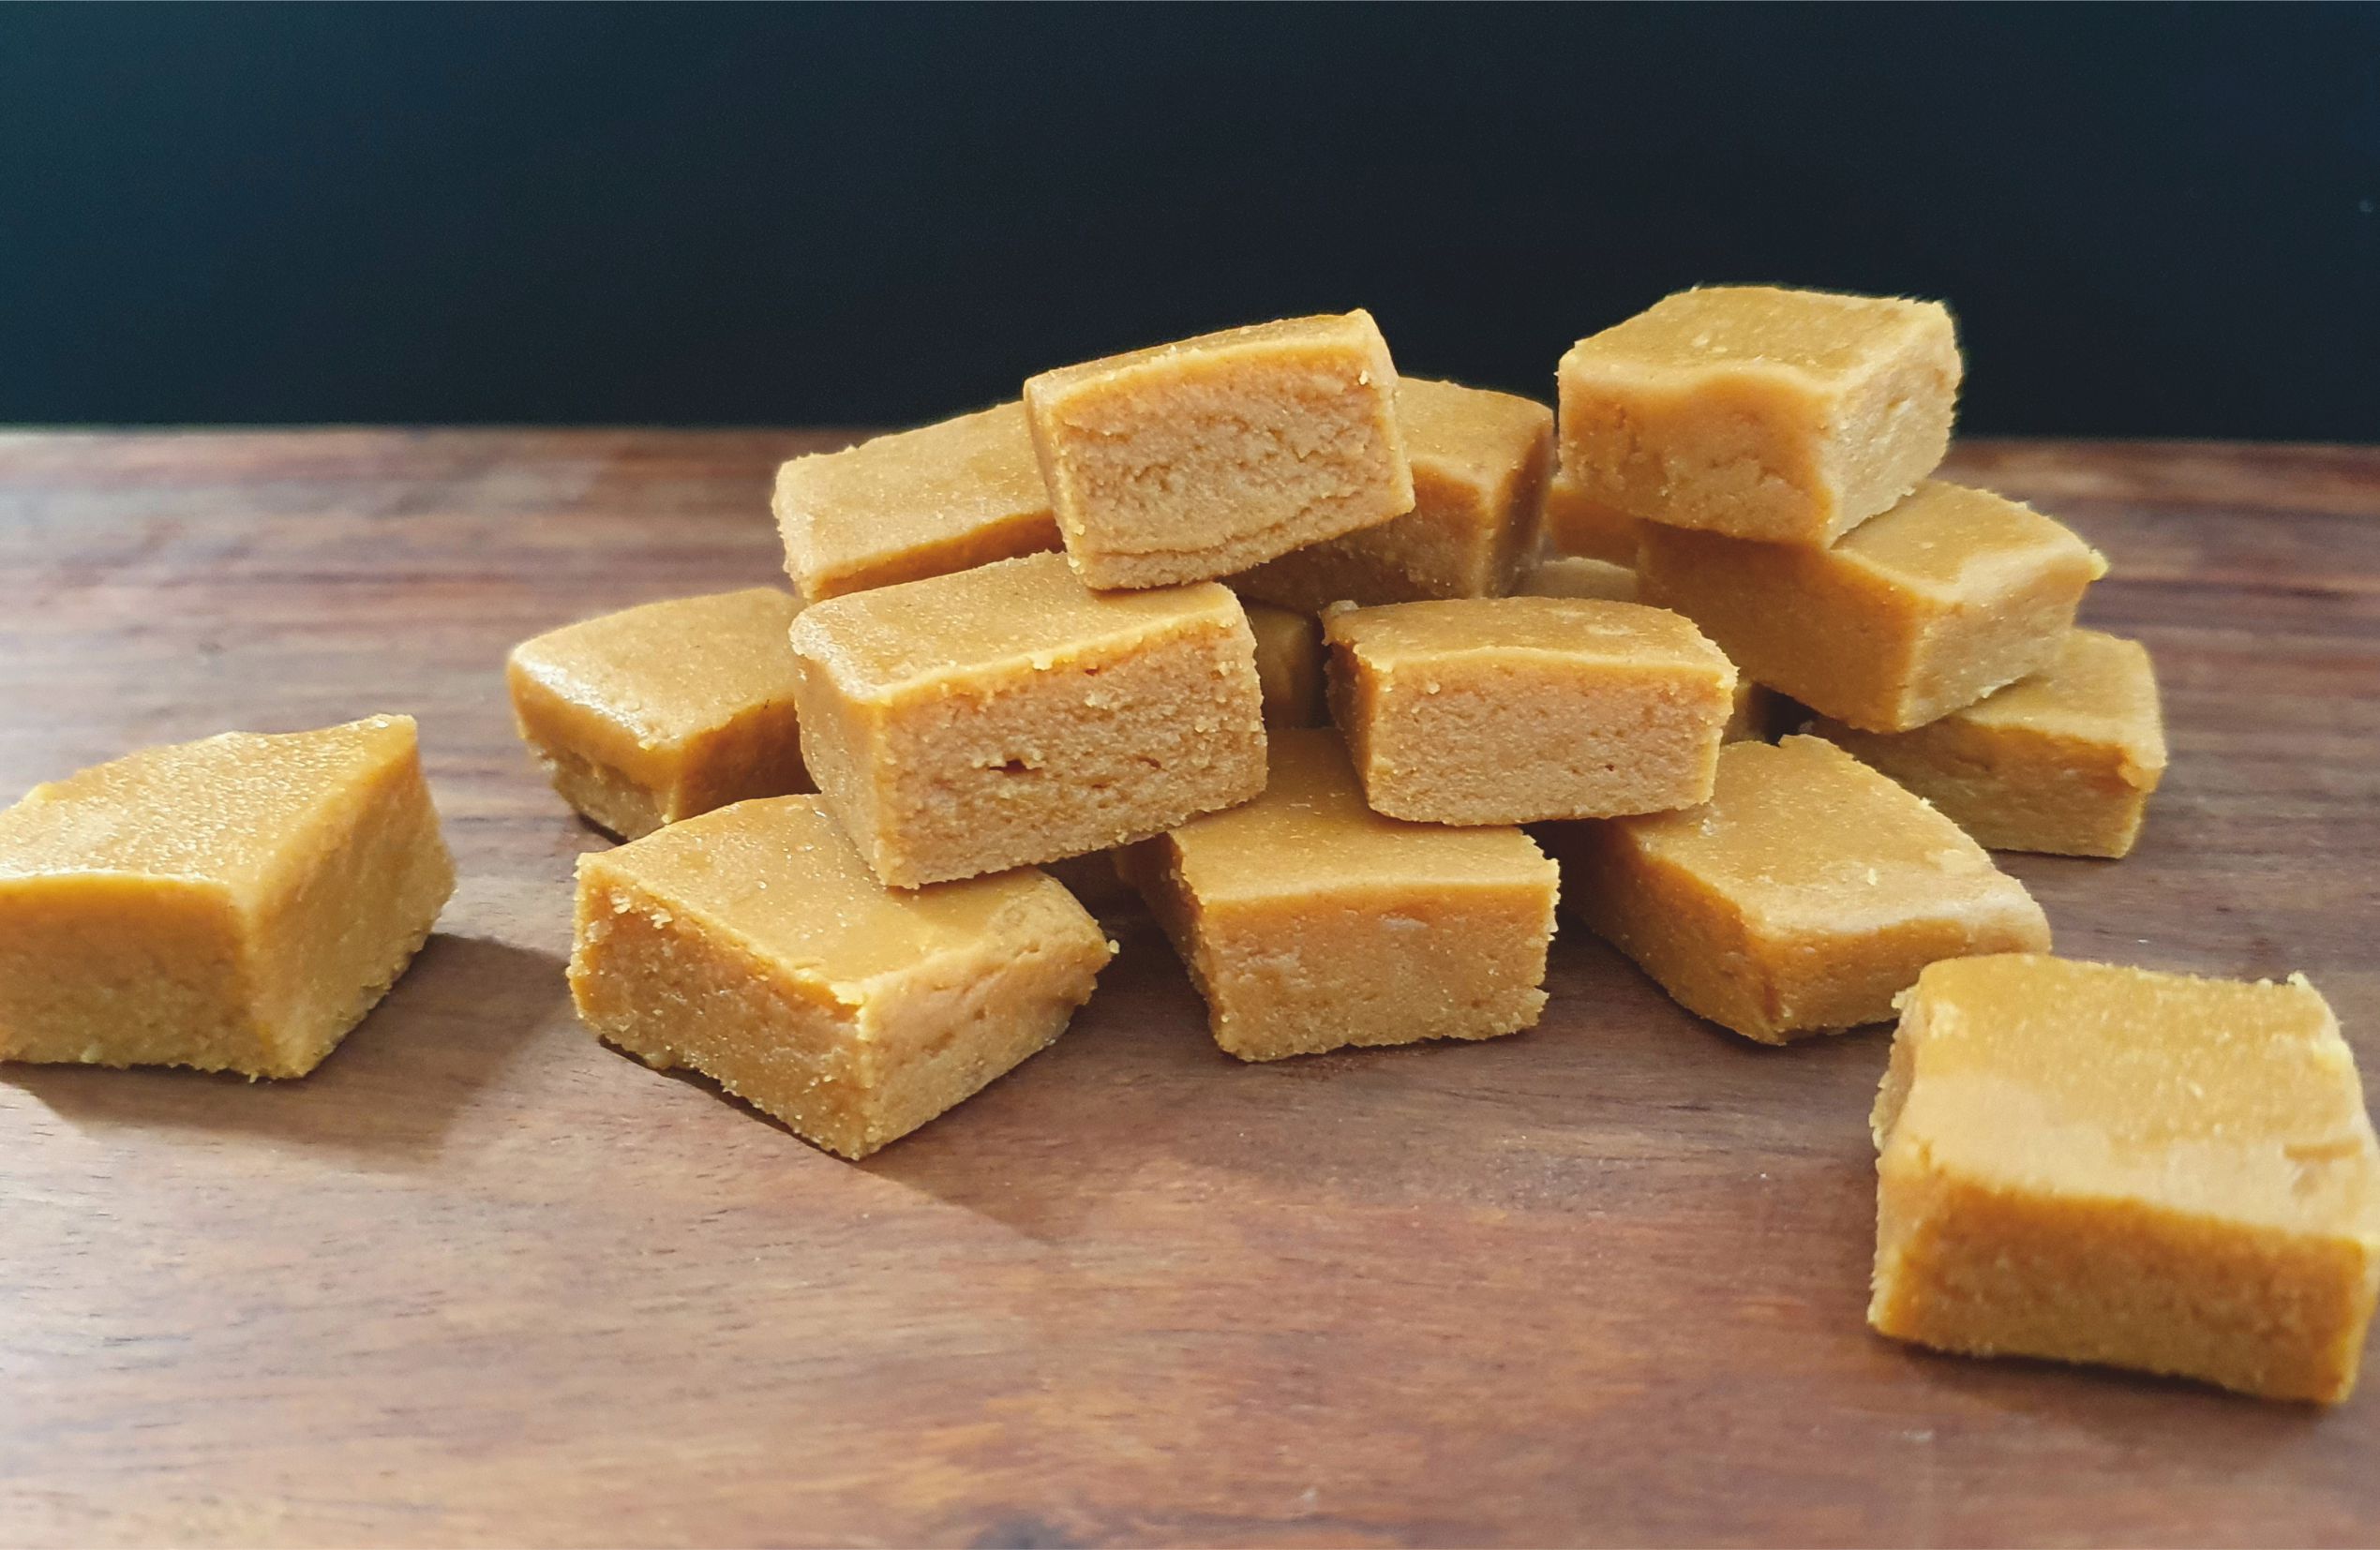 How to make homemade caramel fudge -easy to follow instructions and tips so it cant go wrong